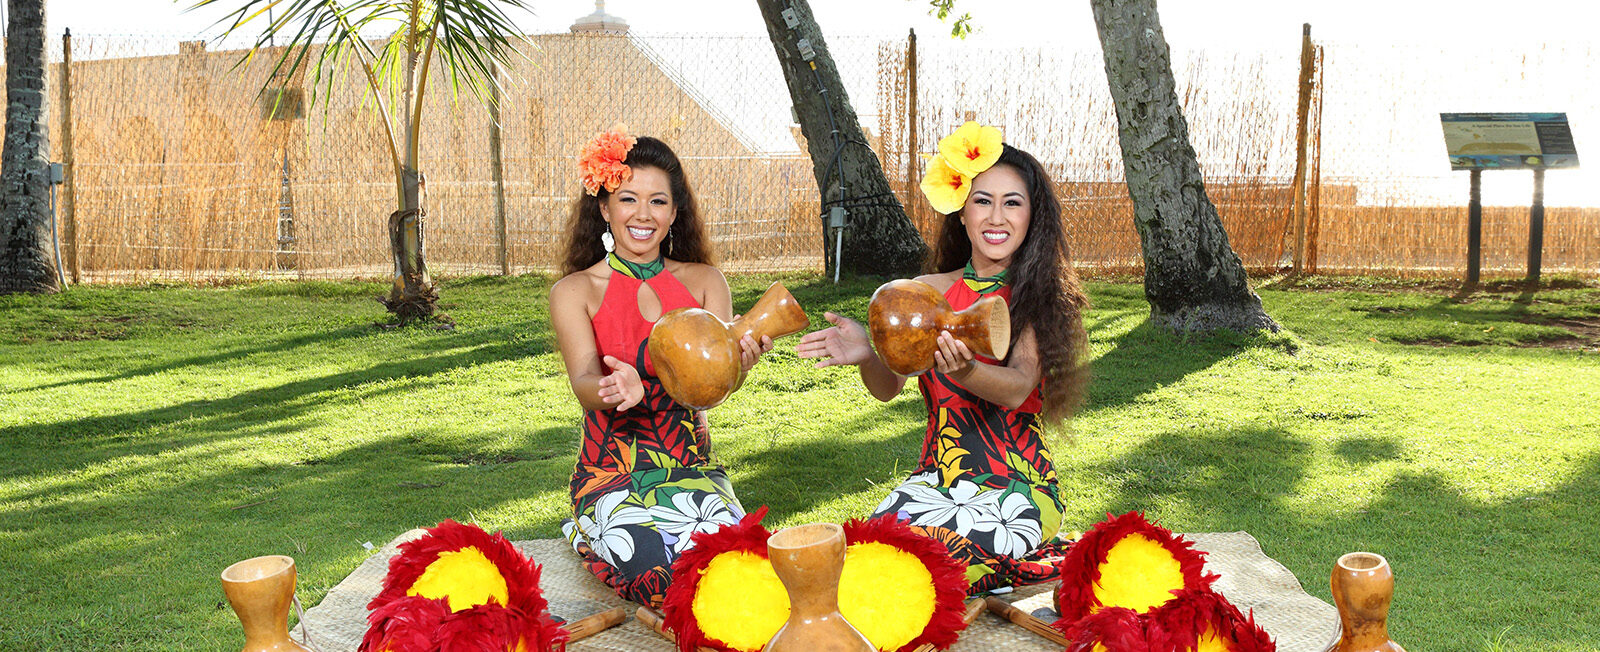 Luau dancers display their instruments on the lawn before the luau begins.